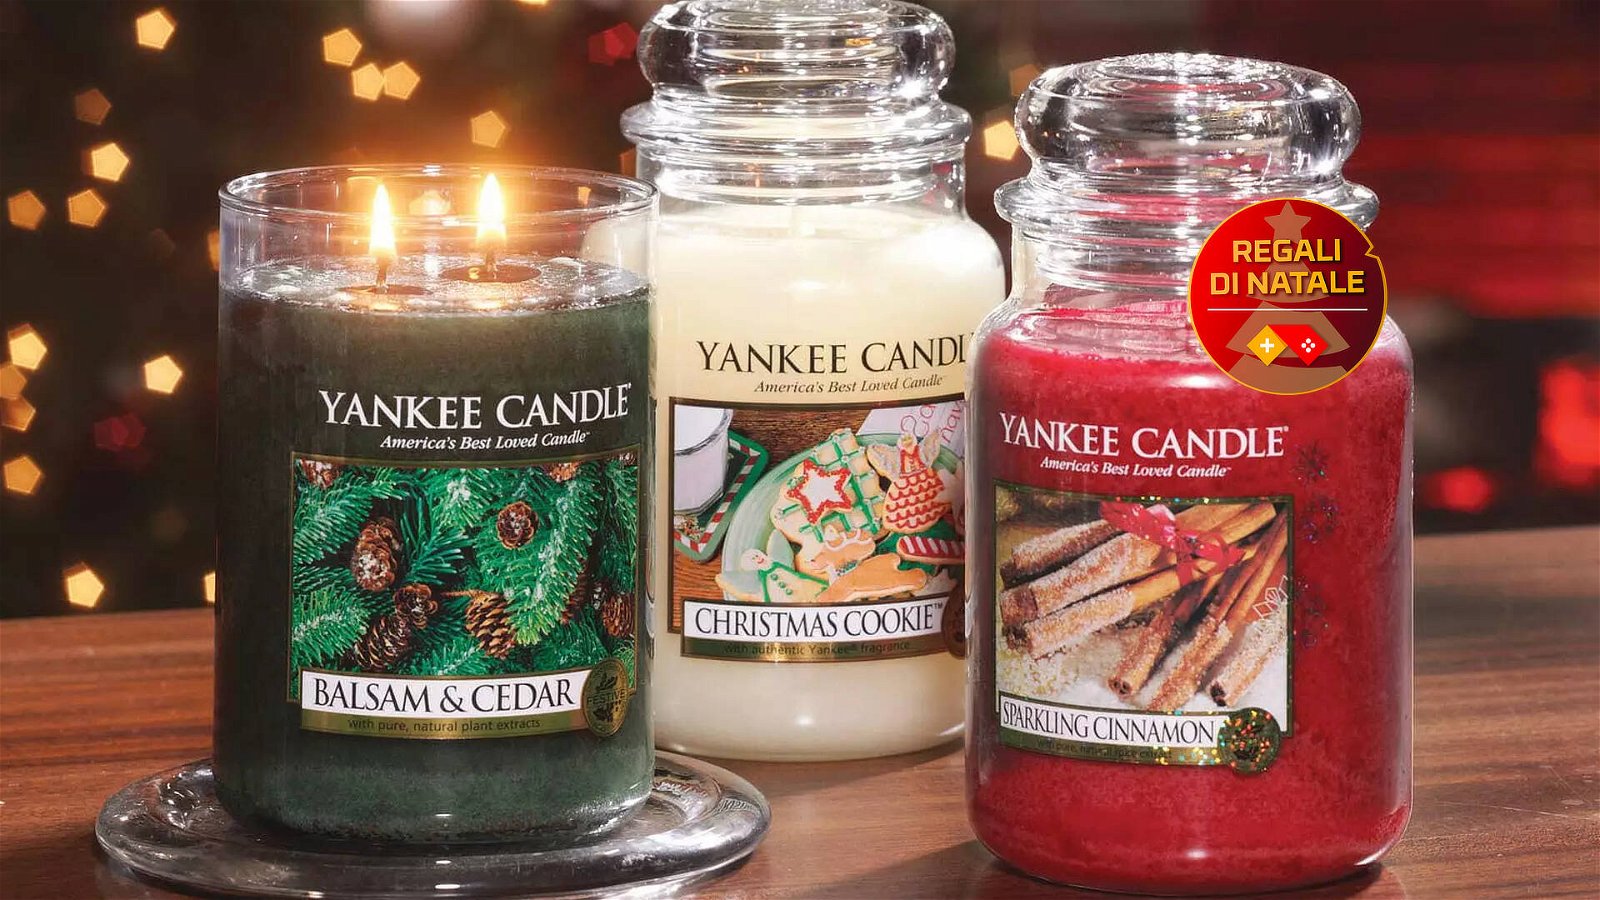 https://cdn.spaziogames.it/storage/wp/new-images/2021/12/yankee-candle-natale-2021-39900.jpg